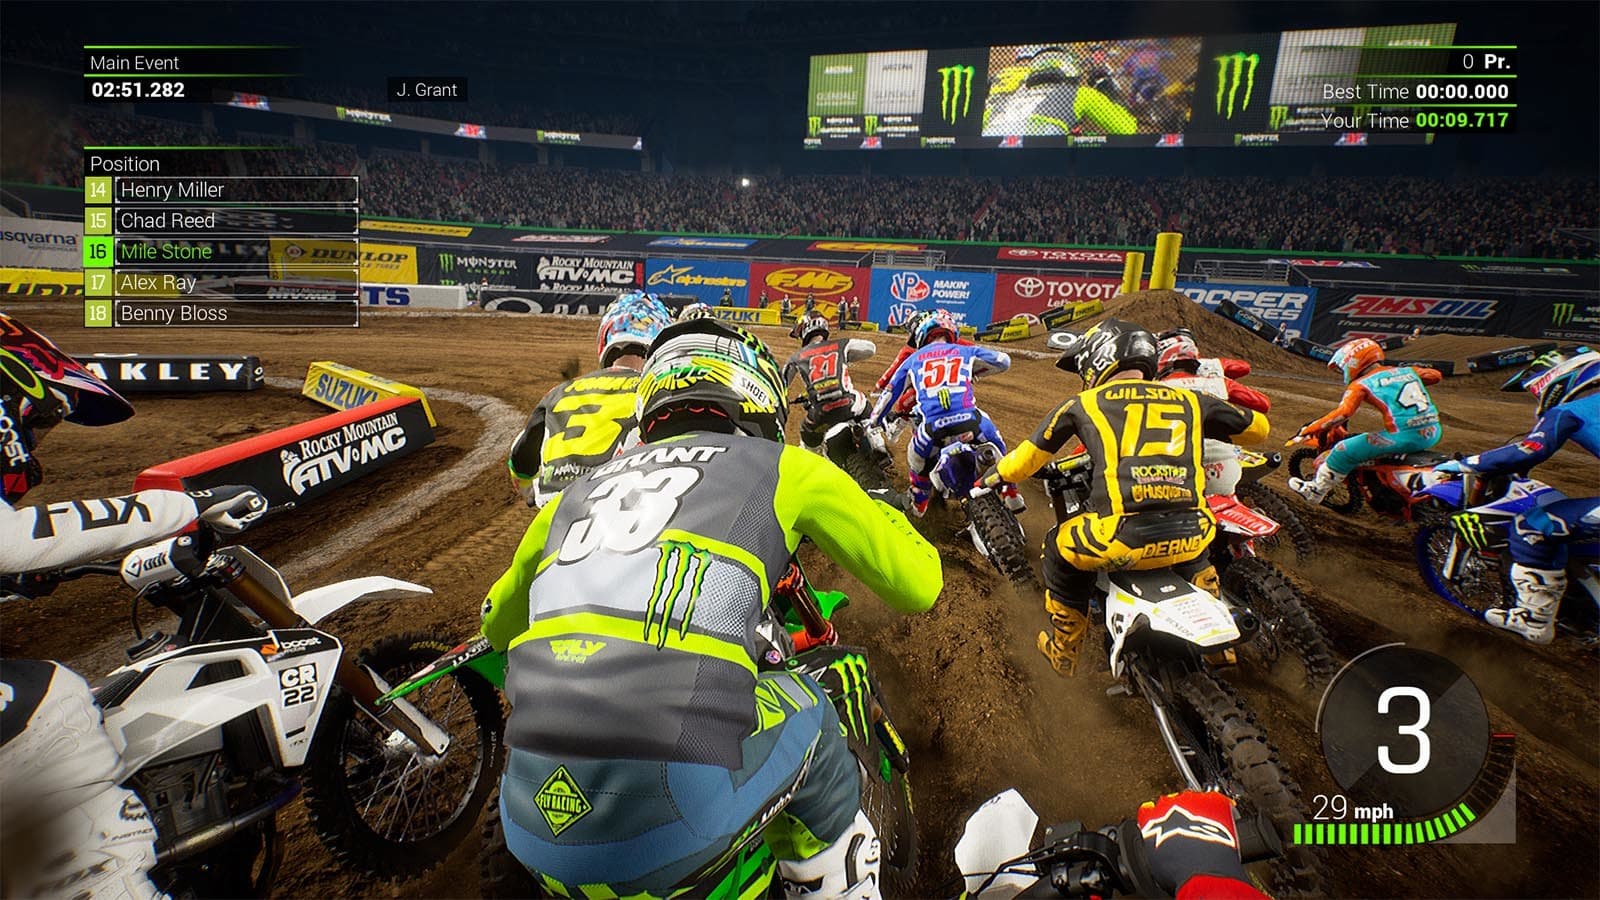 Monster Energy Supercross – The Official Videogame 6